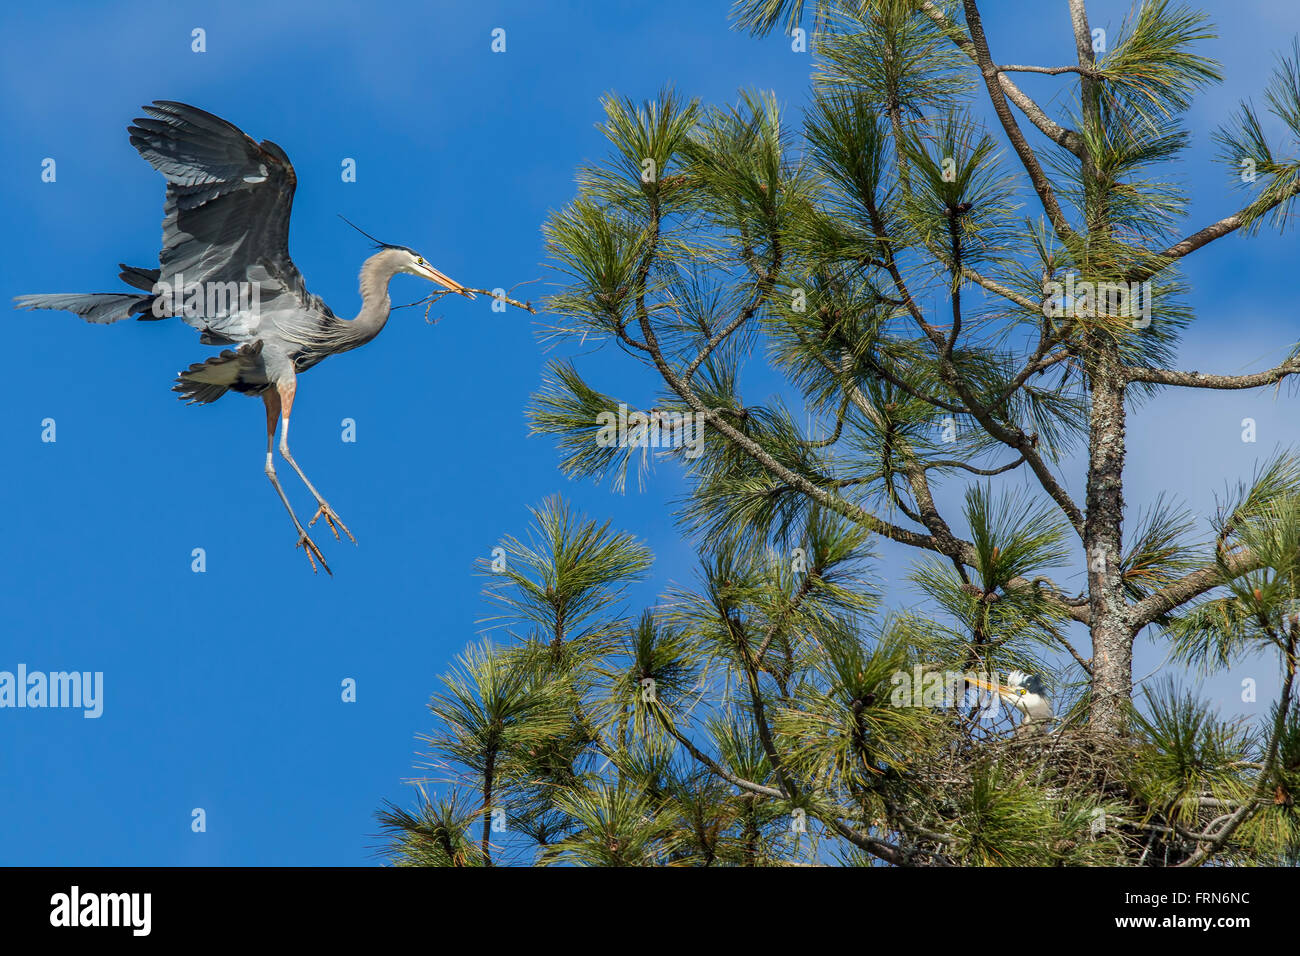 Heron flies in with stick for nest. Stock Photo